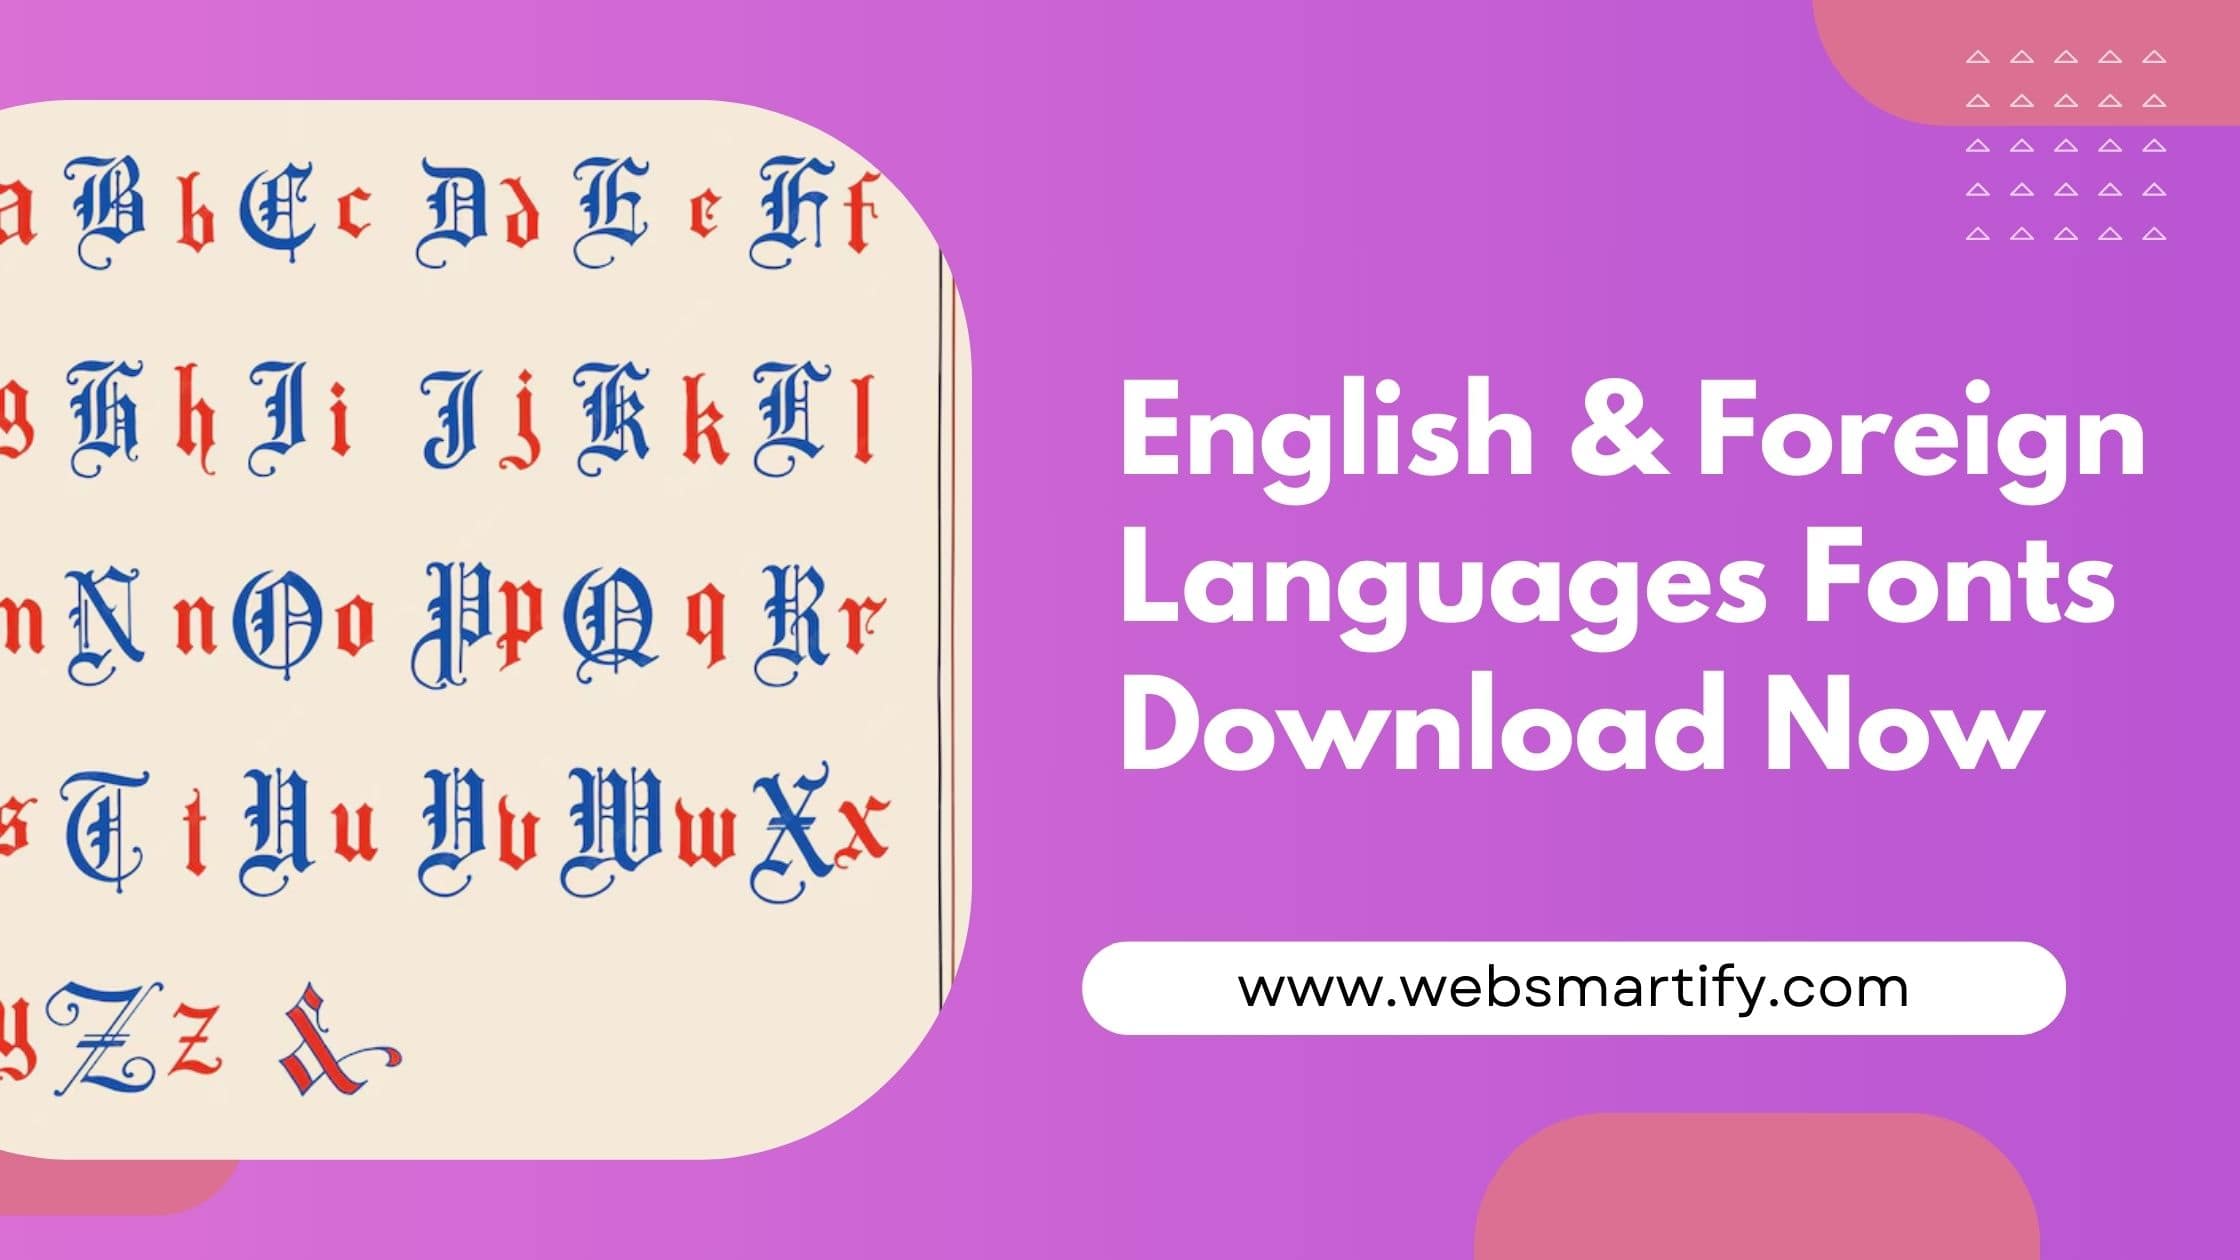 English & Foreign Languages Fonts - Websmartify